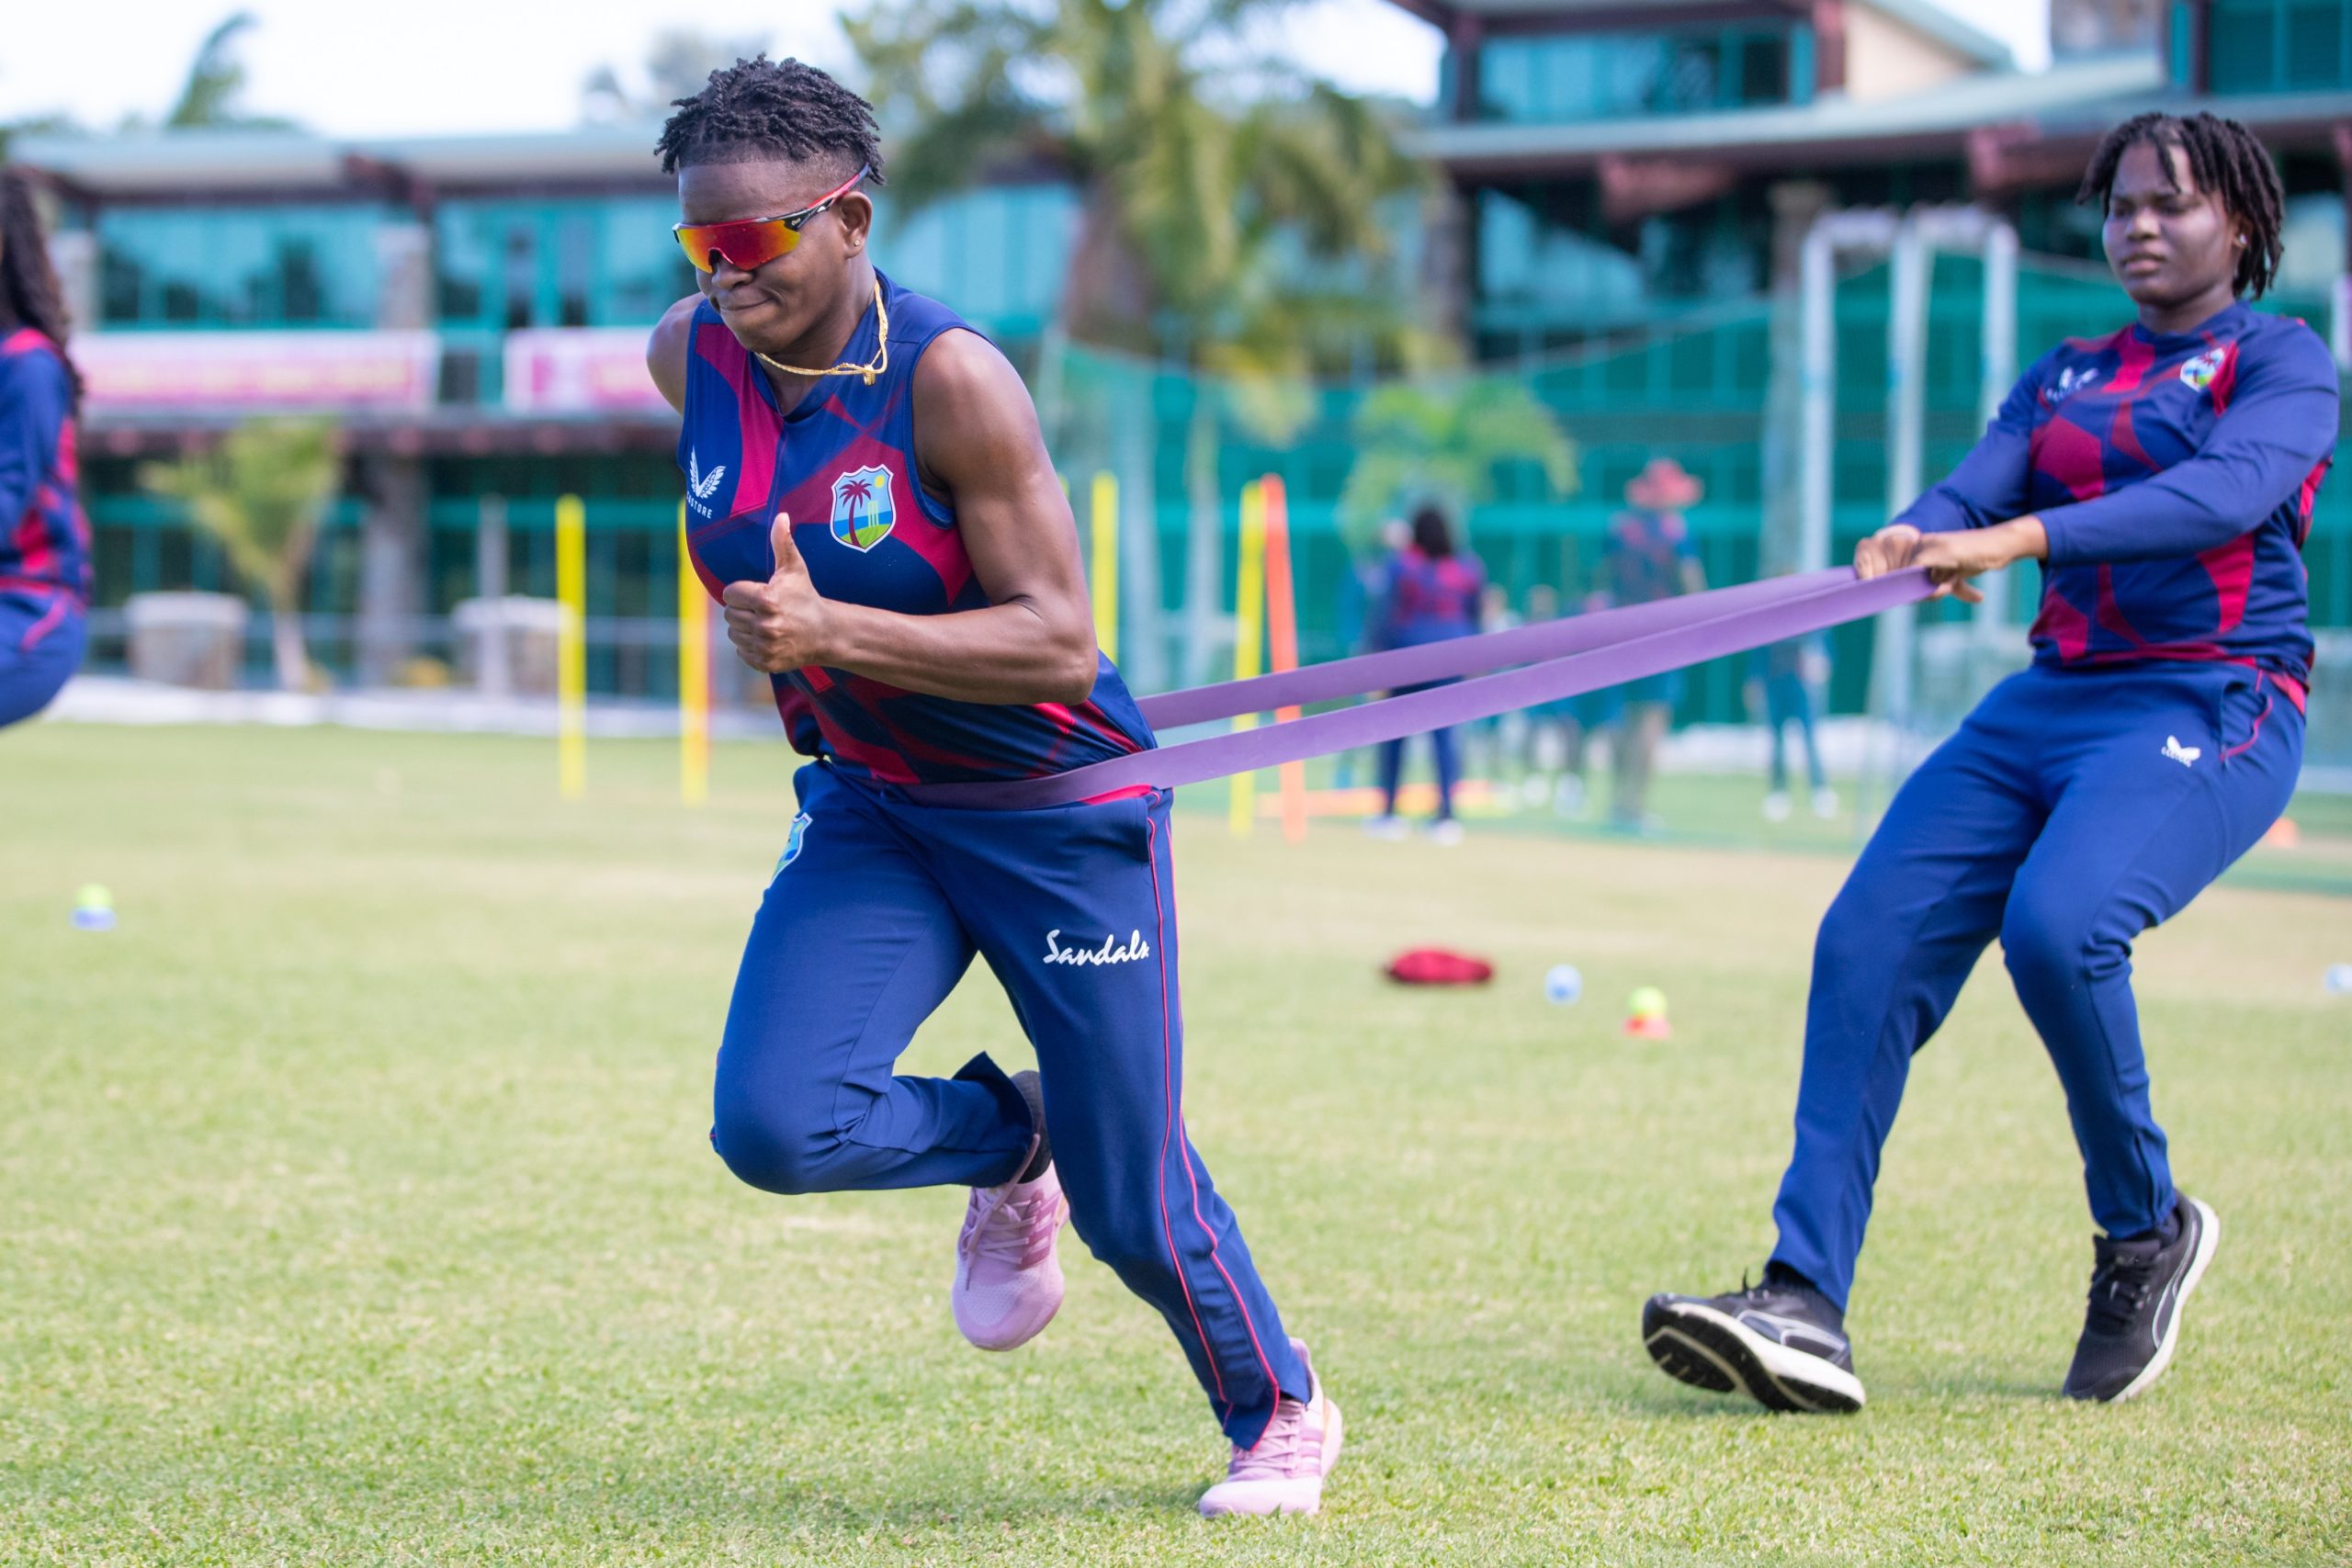 CWI: West Indies Women’s Rising Stars Under 19s on the rise!